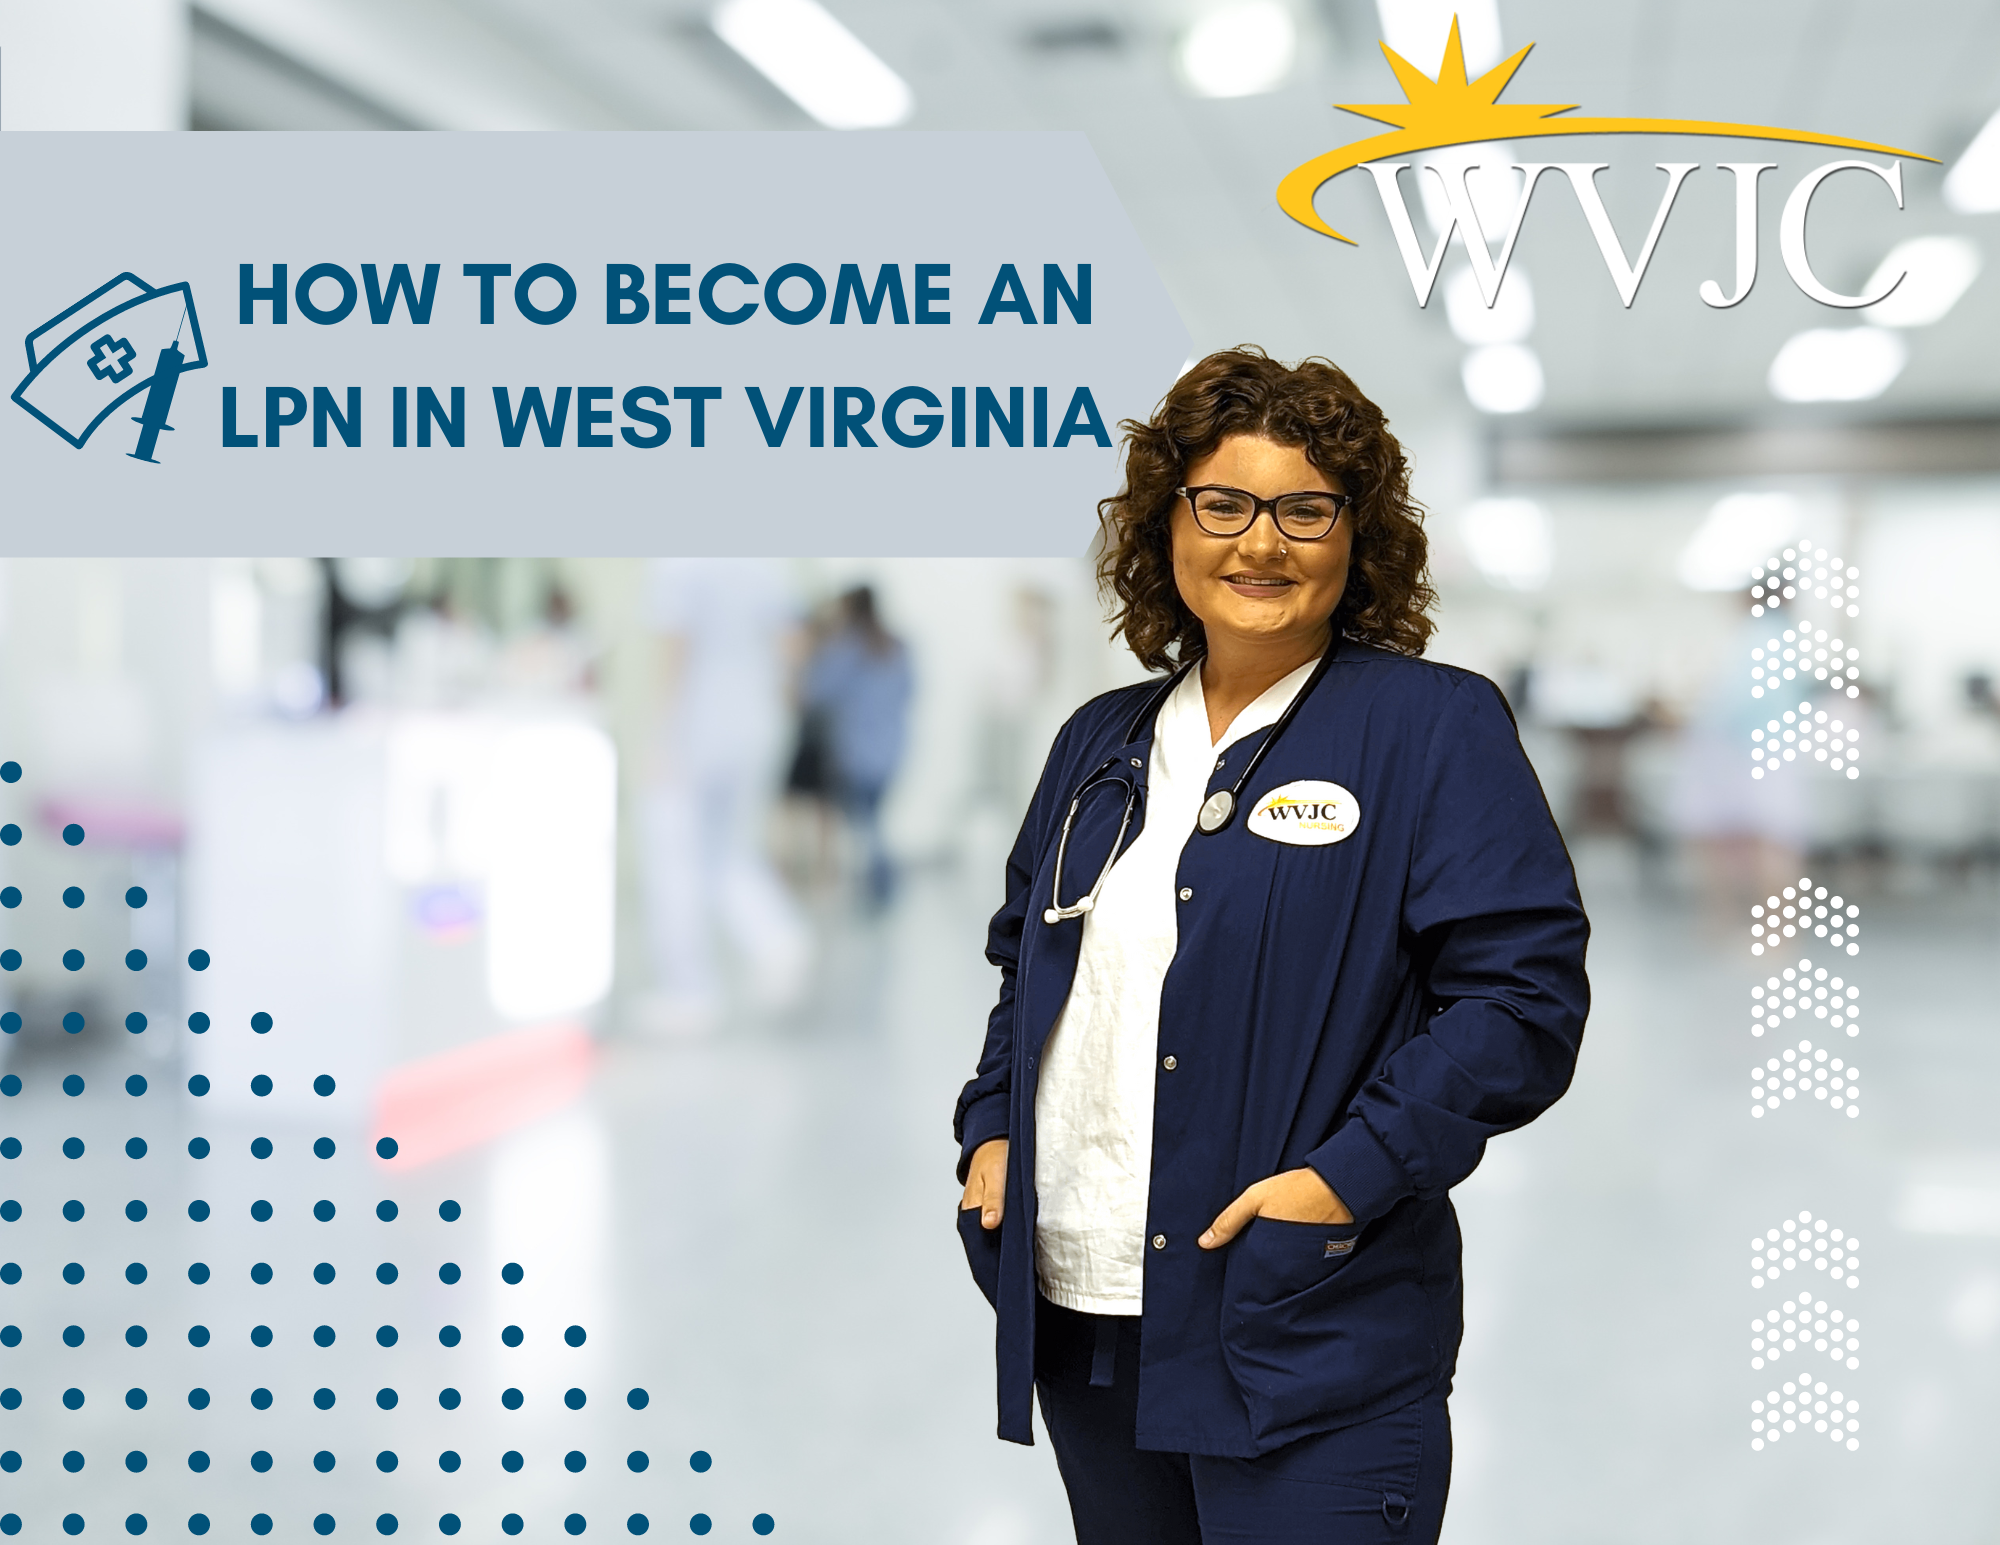 How To Become An LPN In West Virginia 1 | WVJC